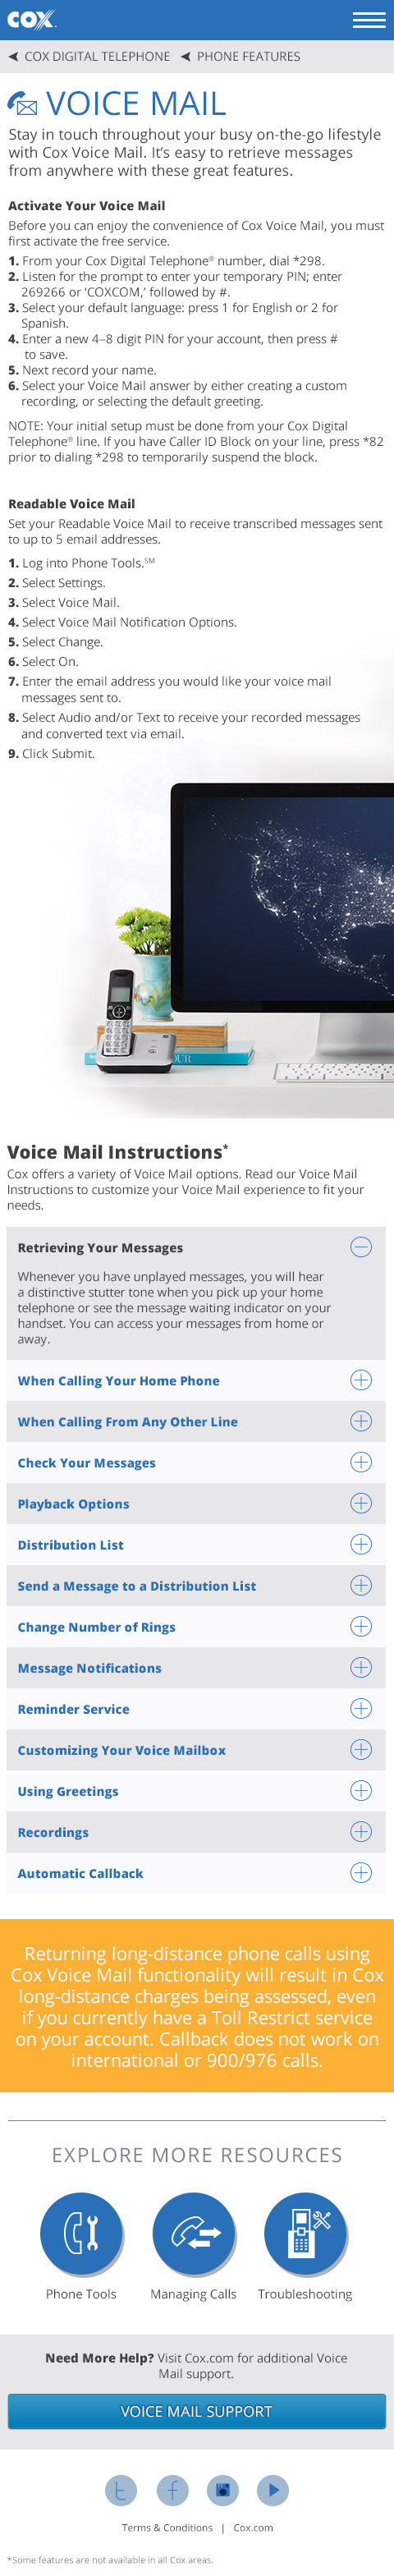 WelcomeCenter_Phone_Features_Voicemail_Mobile_expanded.jpg